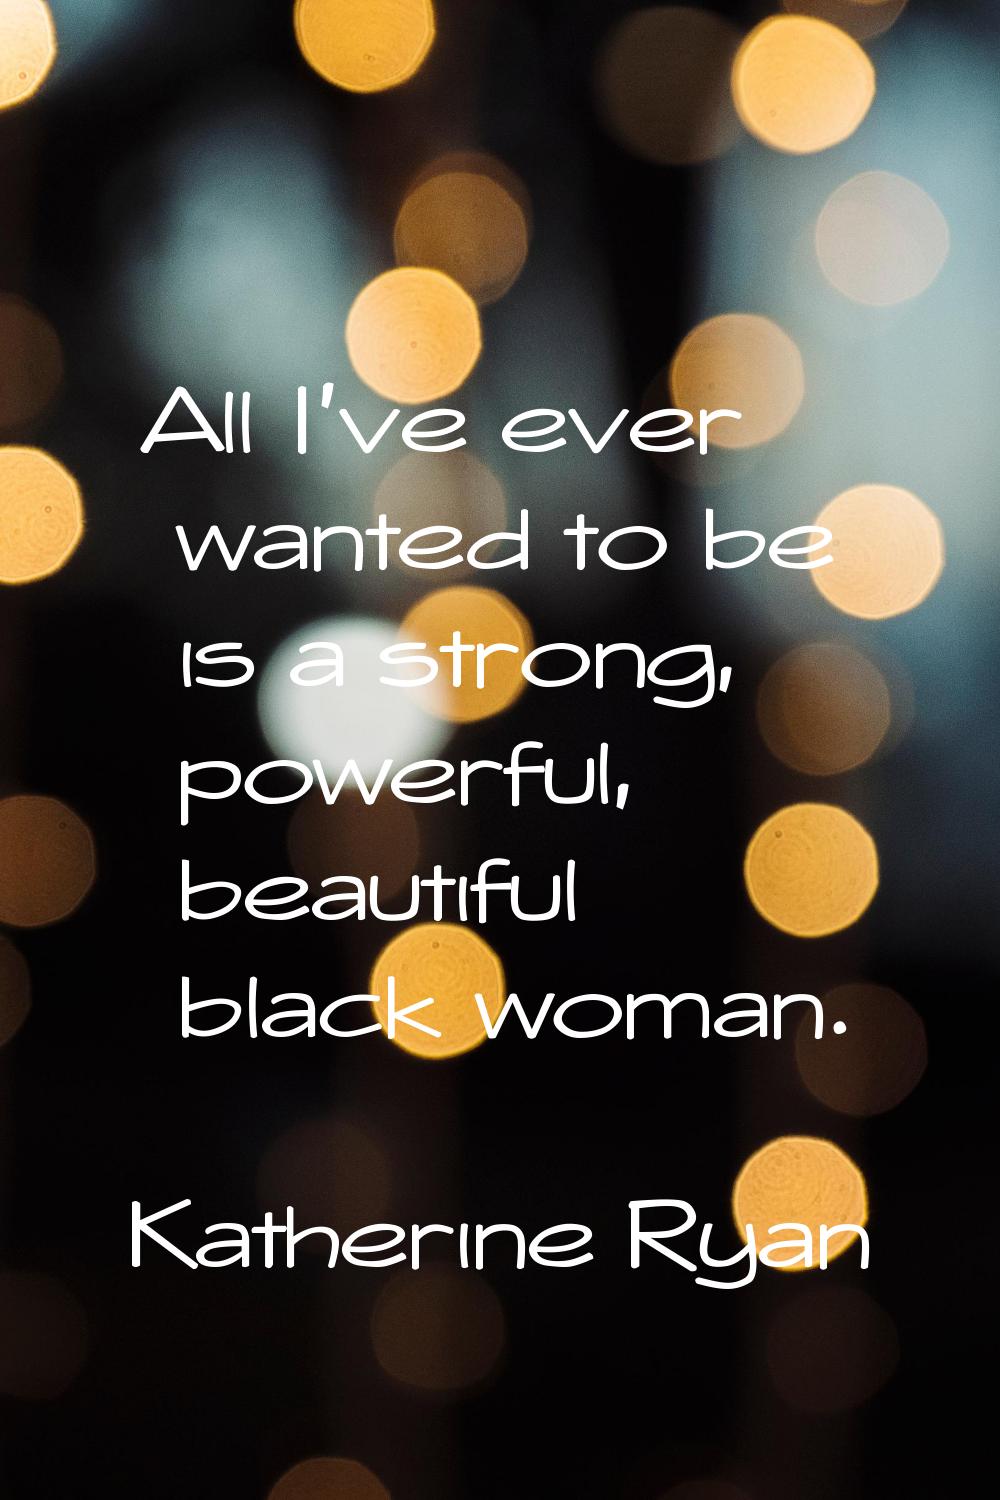 All I've ever wanted to be is a strong, powerful, beautiful black woman.